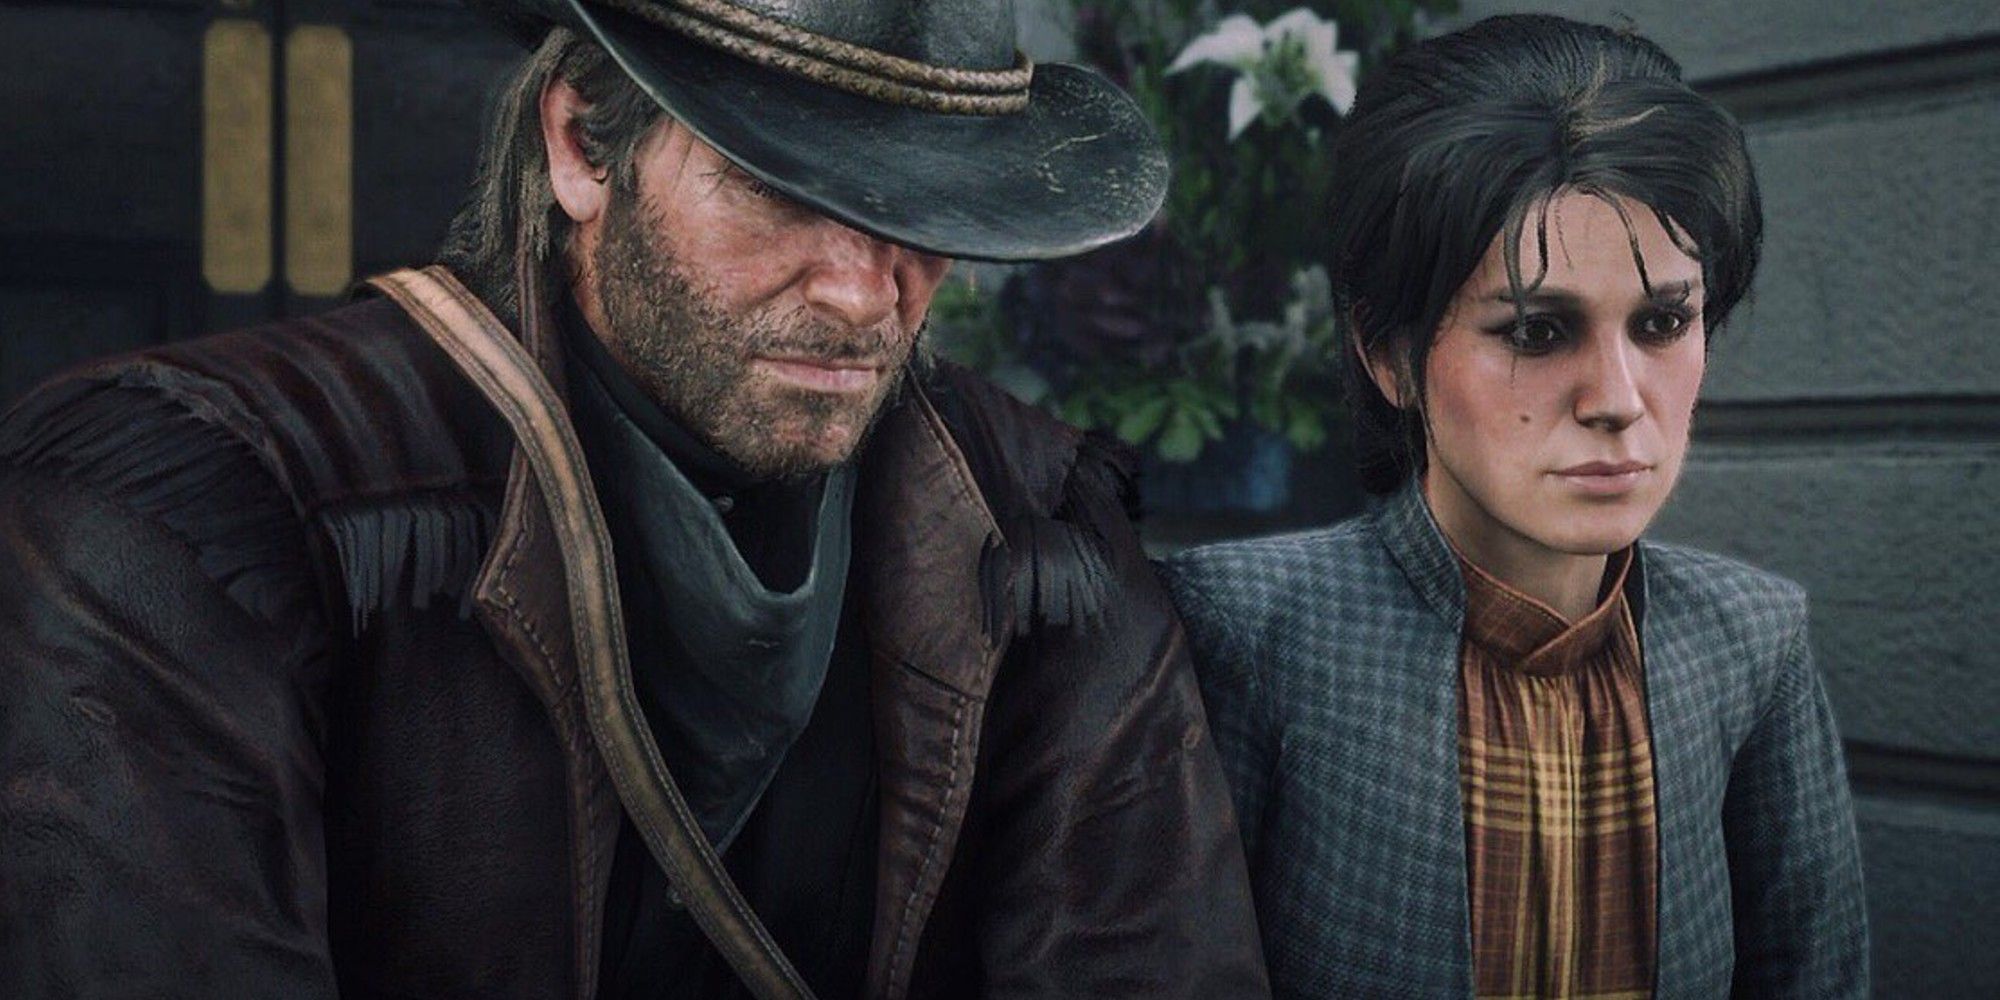 Red Dead Redemption 2 The Best Things Arthur Morgan Has The Chance To Do Ranked